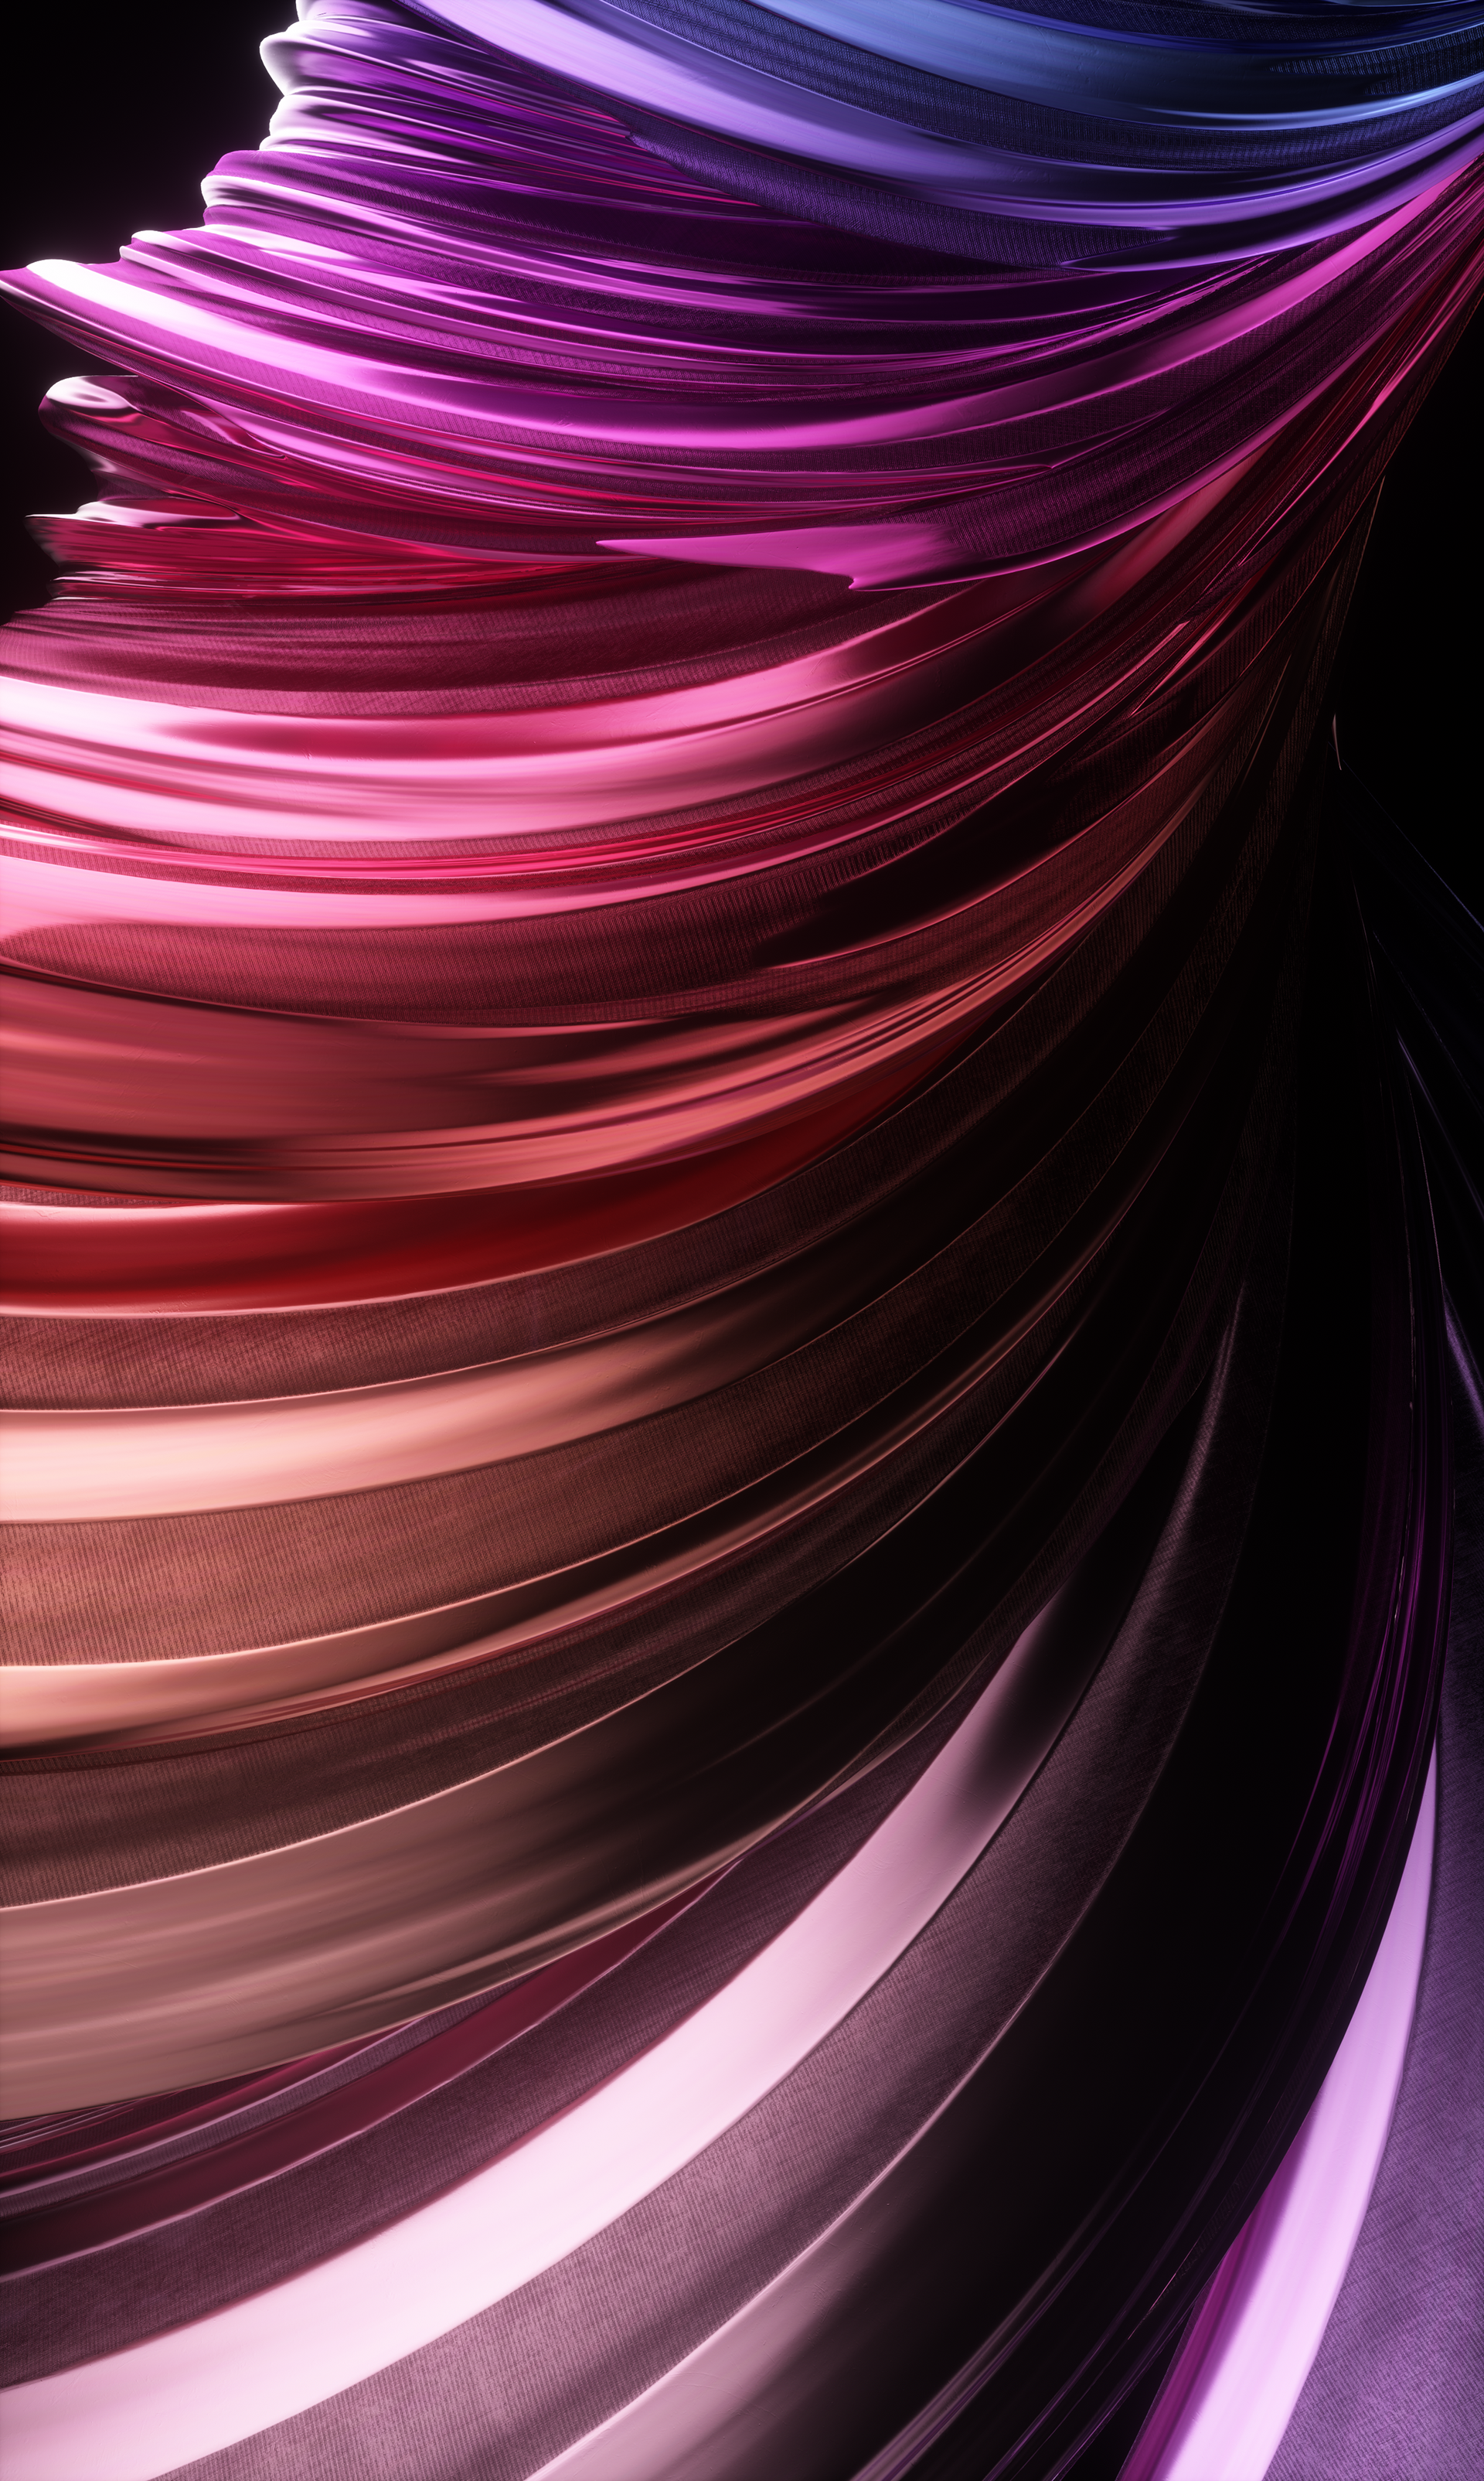 Curved Lines Series 1.0 on Behance93a6f077426589.5cc2cf6eaf00c.png